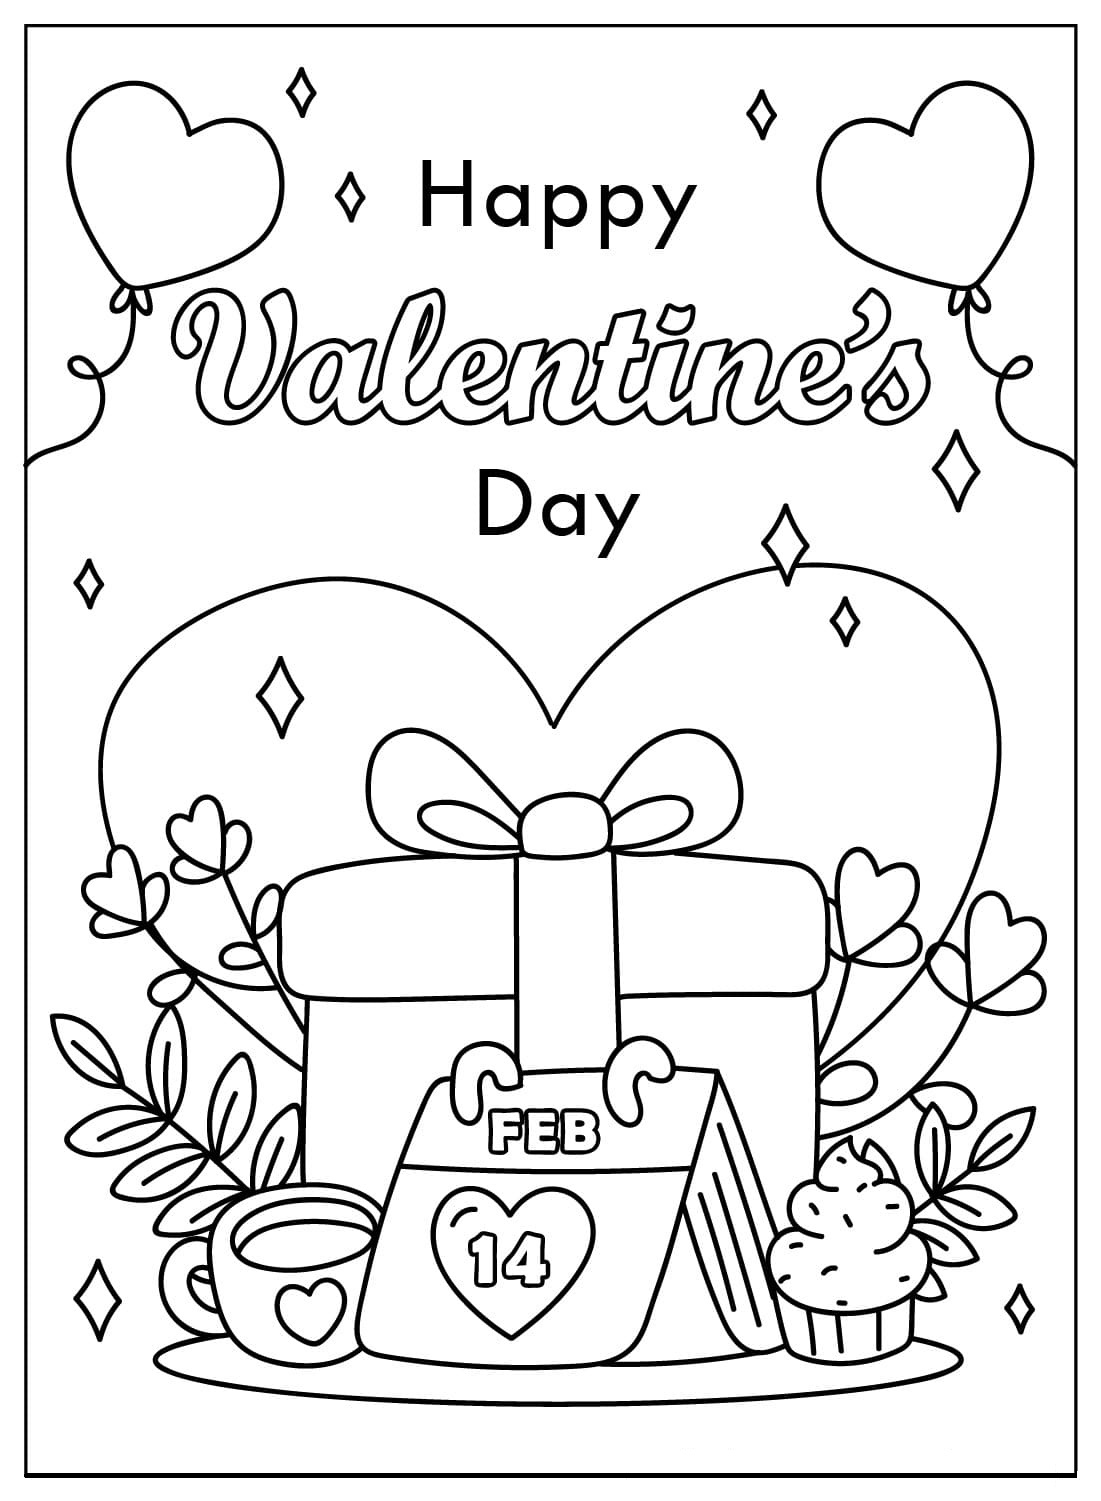 Valentines Day Cards Coloring Pages